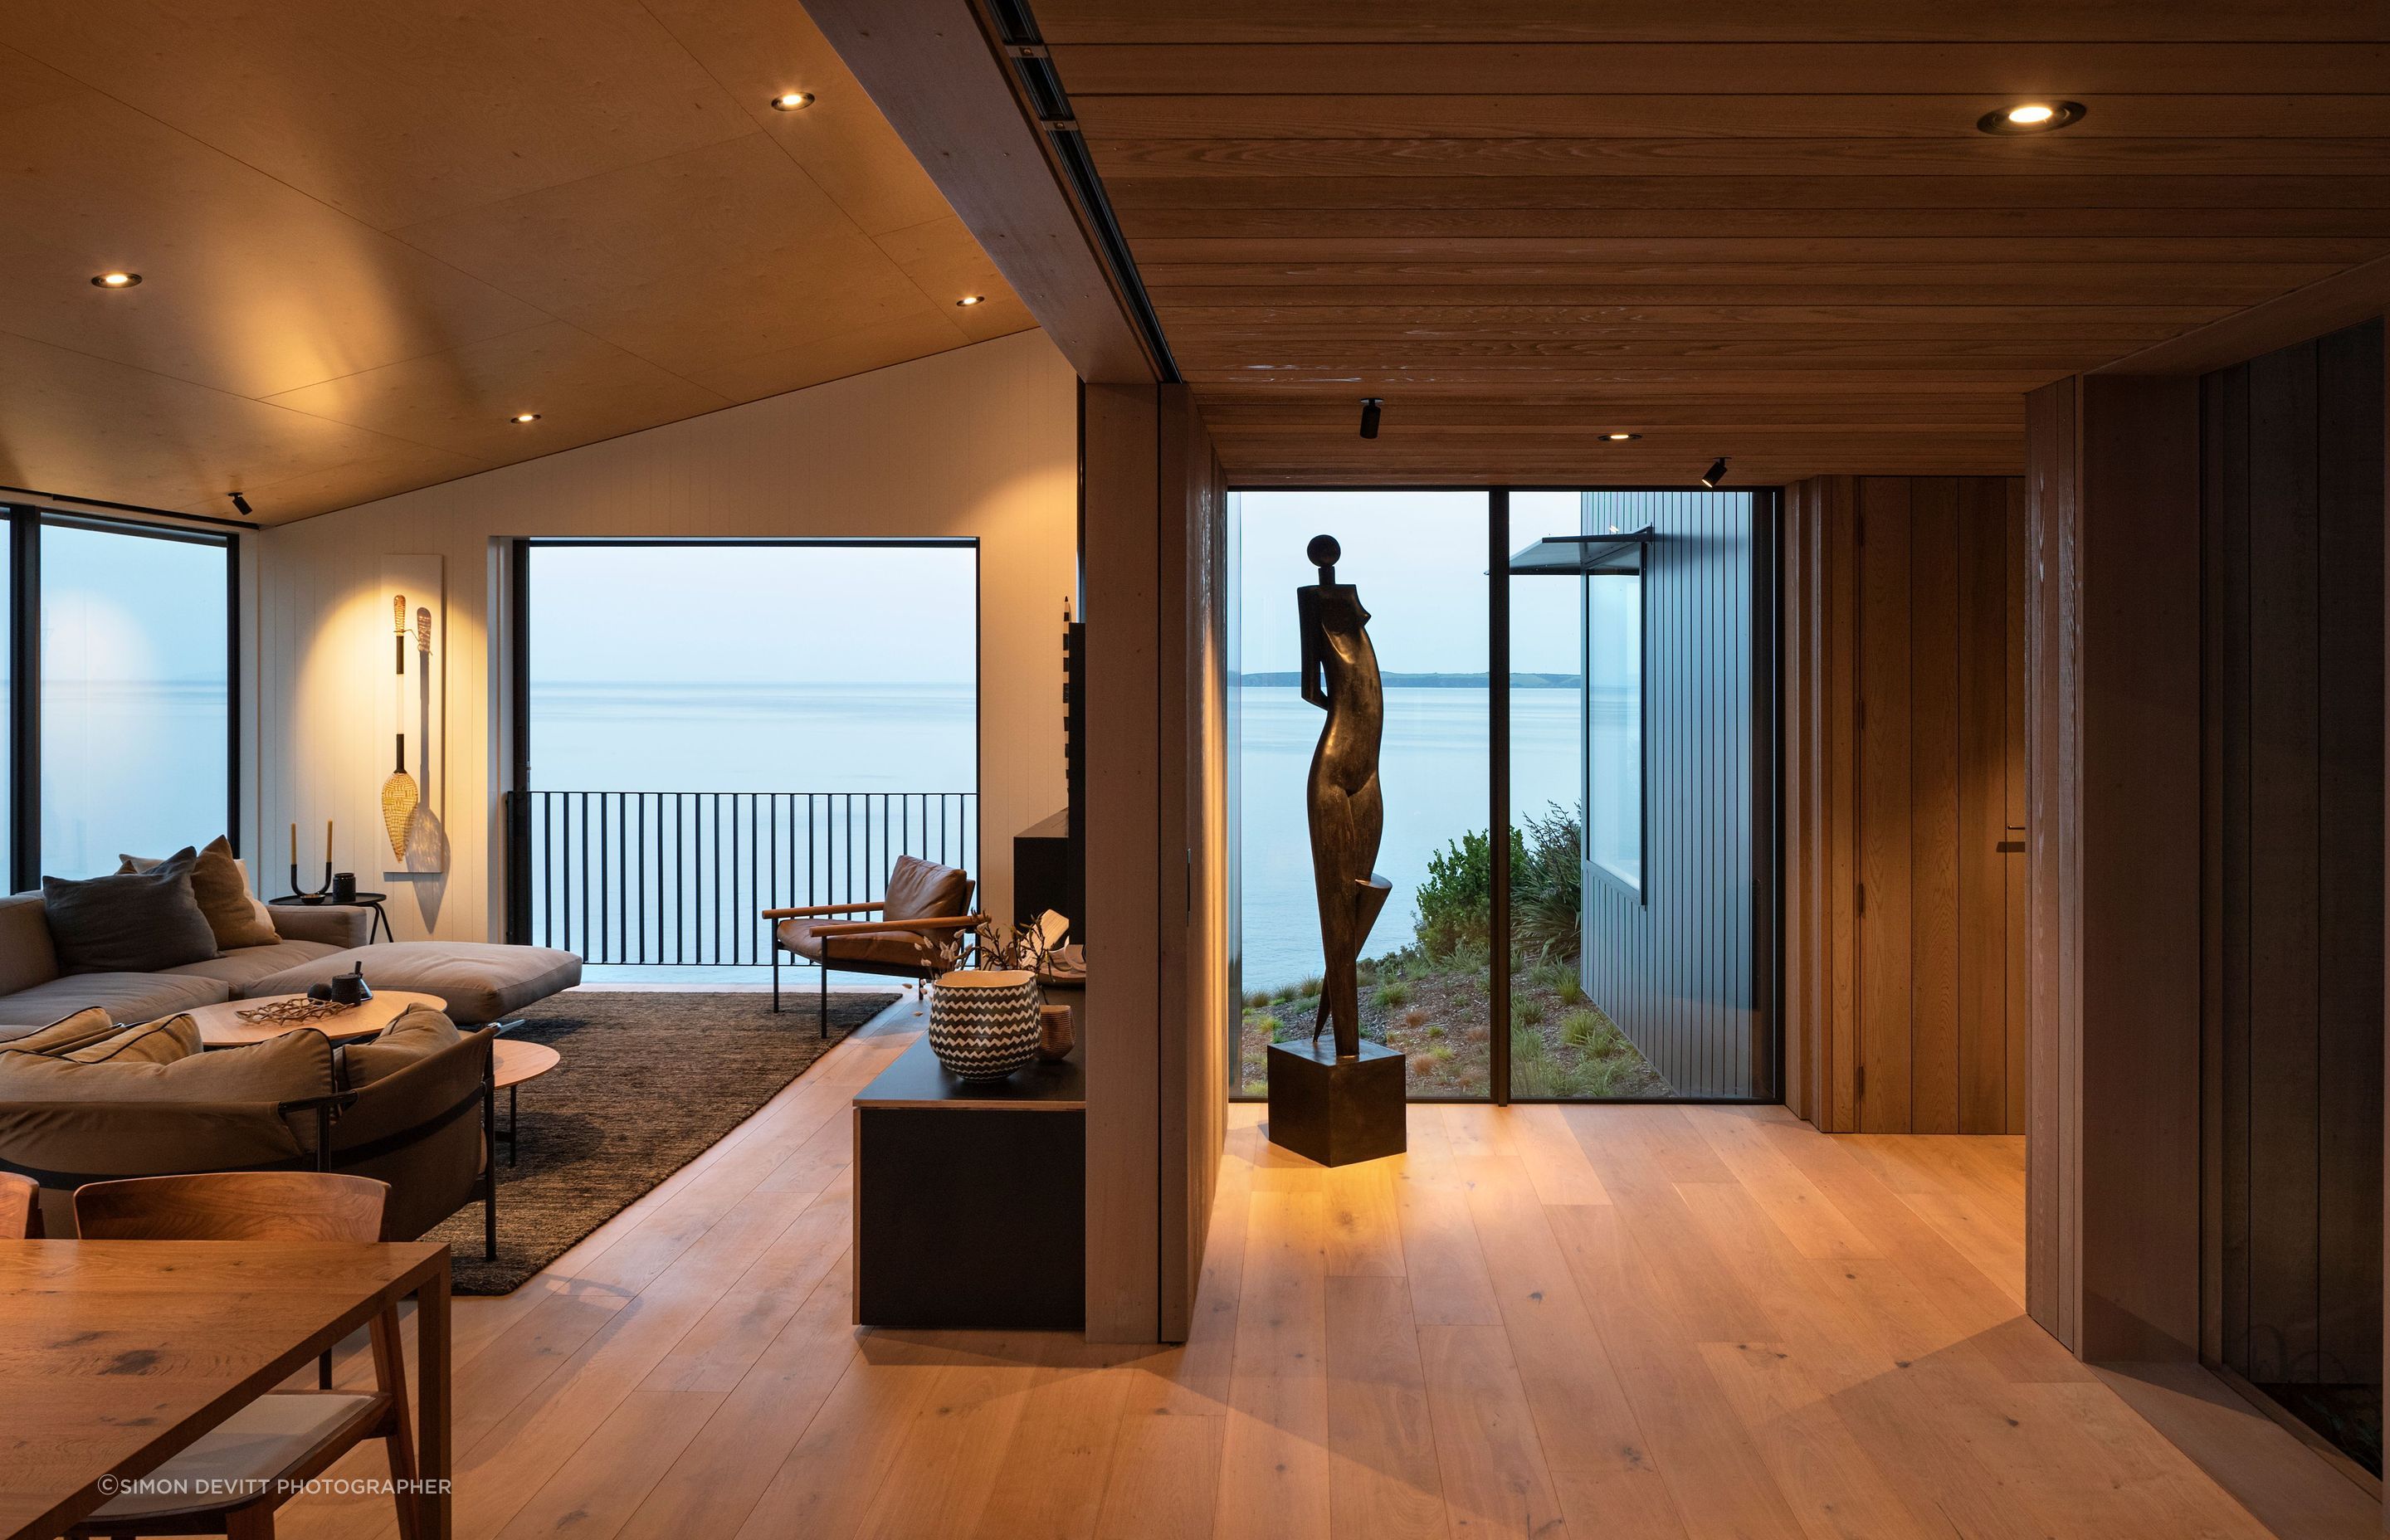 Design: Strachan Group Architects